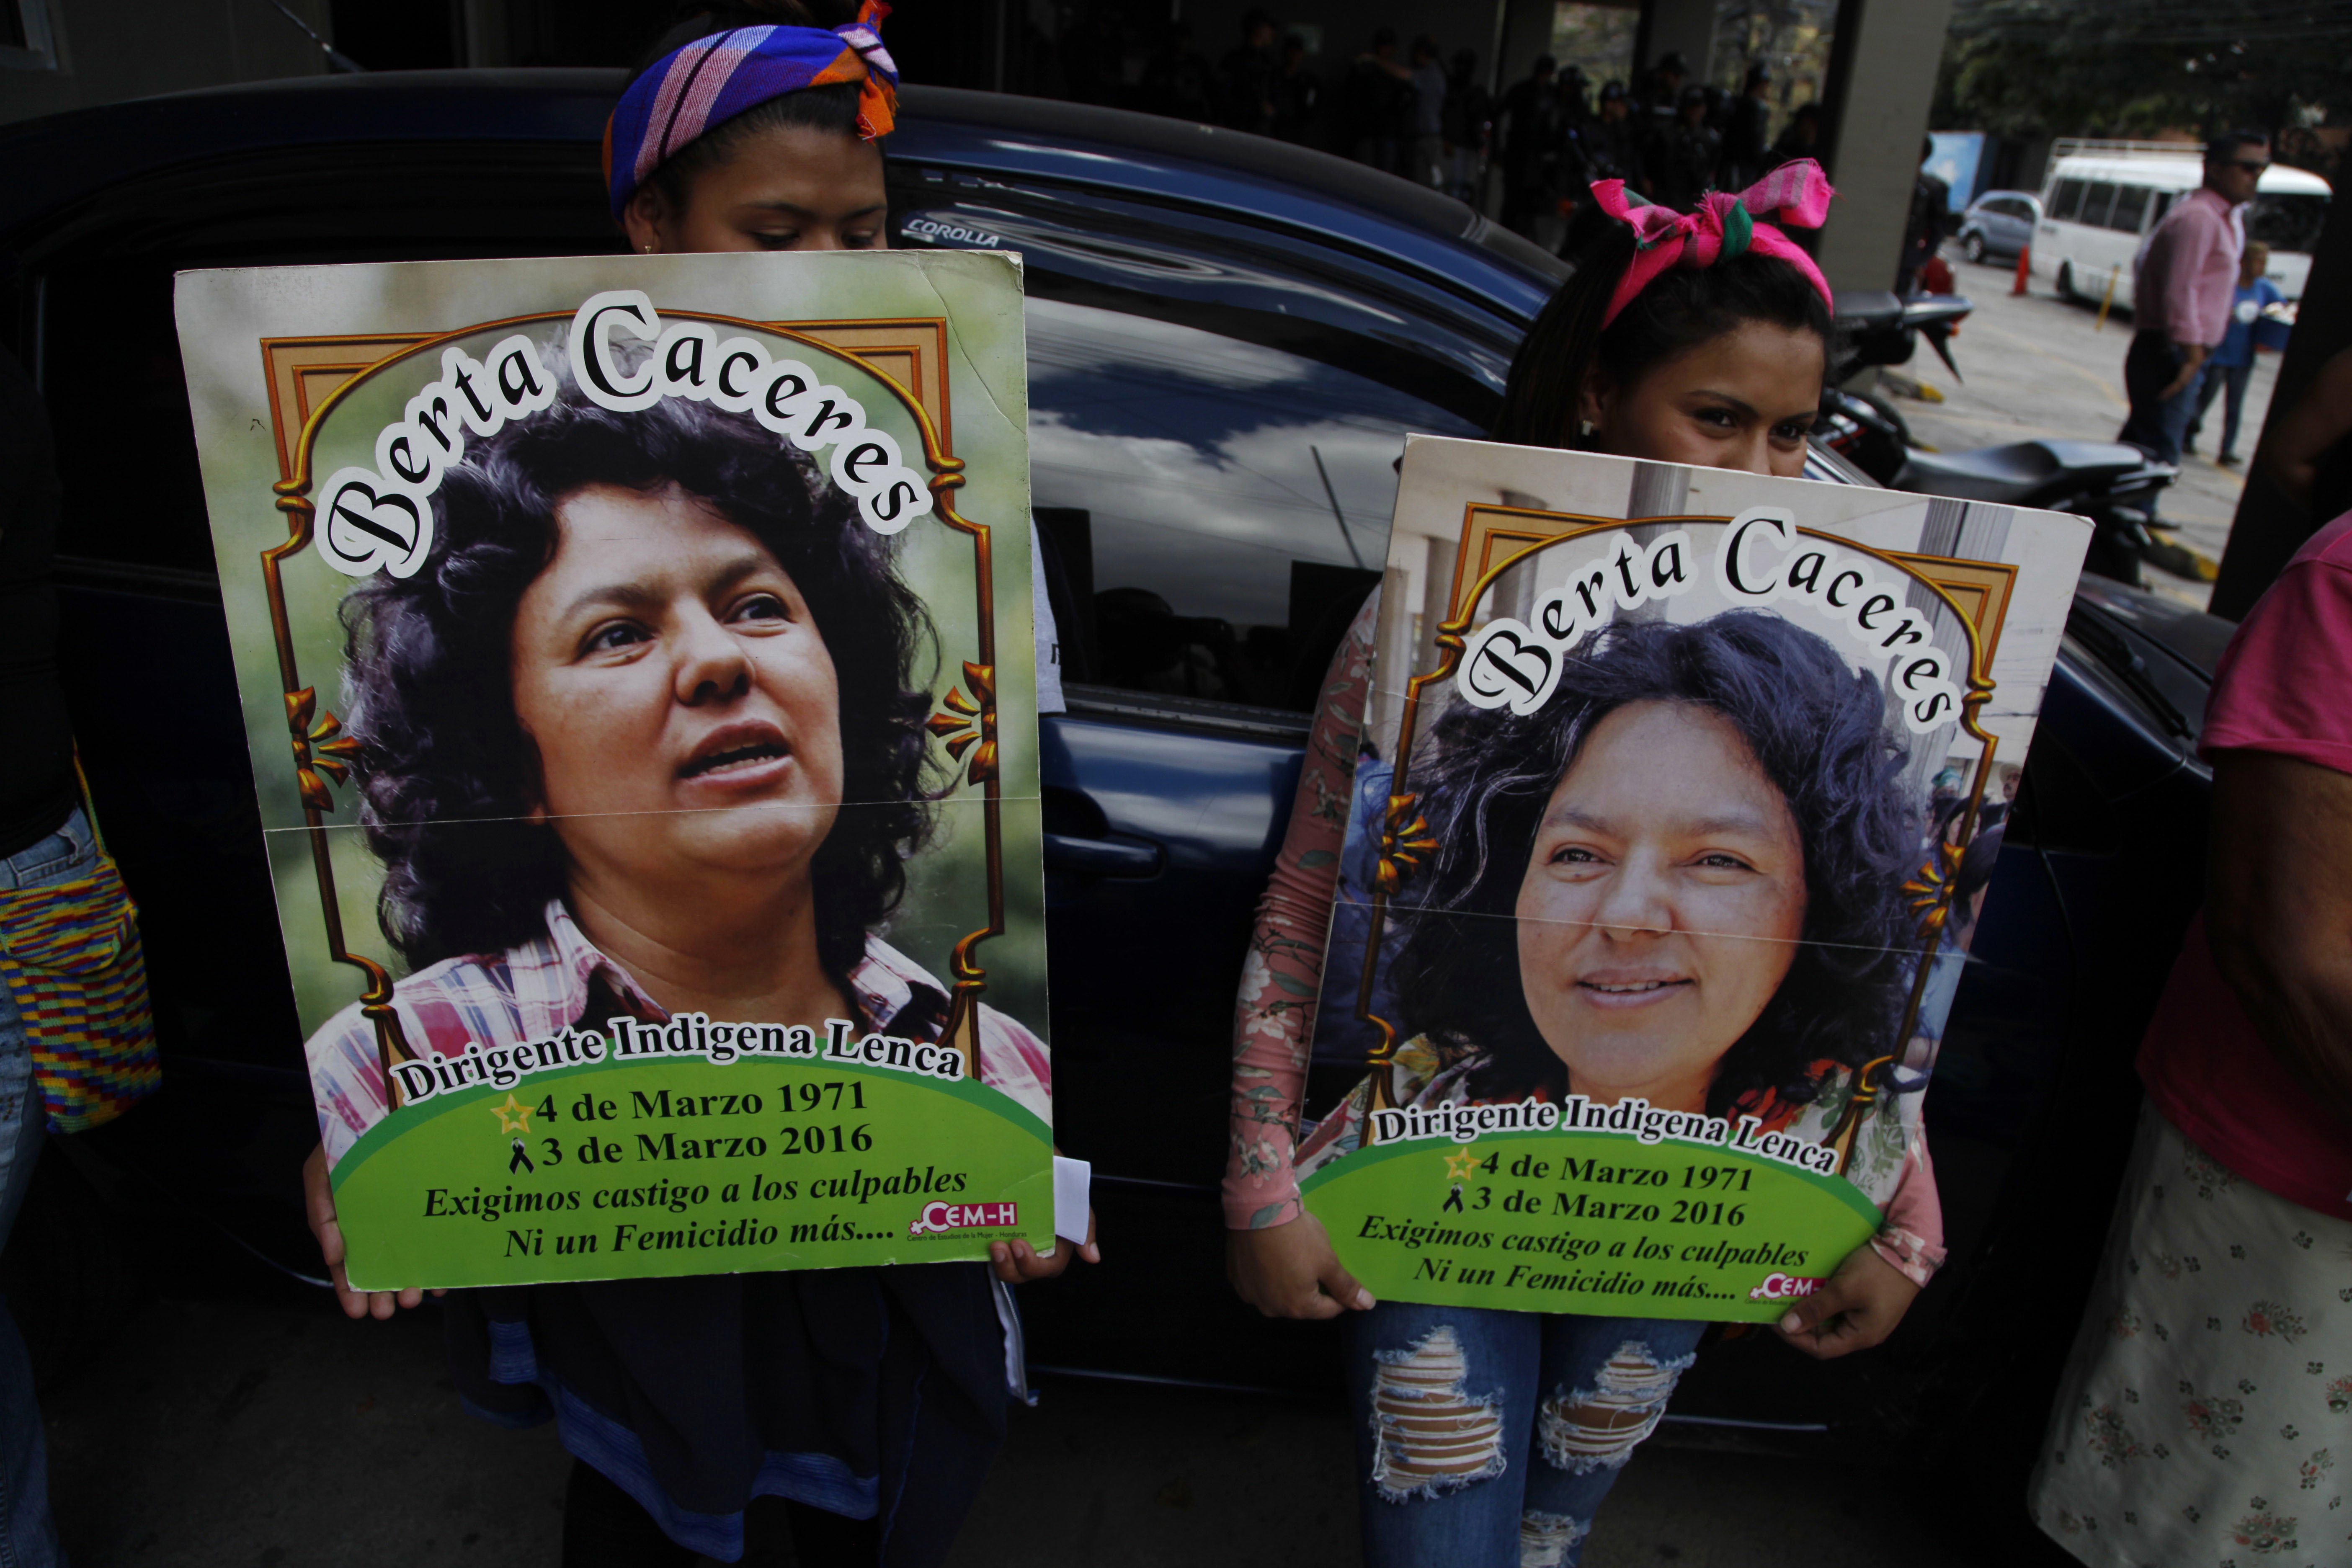 Family, friends and activists gather to demand justice for the murder of environmental activist and Goldman Environmental Prize winner Berta Caceres, in Tegucigalpa, Honduras, Friday, March 2, 2018. The authorities’ failure to identify those who ordered the brutal murder of Caceres and bring them to justice puts hundreds of human rights defenders at grave risk, said Amnesty International on the second anniversary of her killing. (AP Photo/Fernando Antonio)